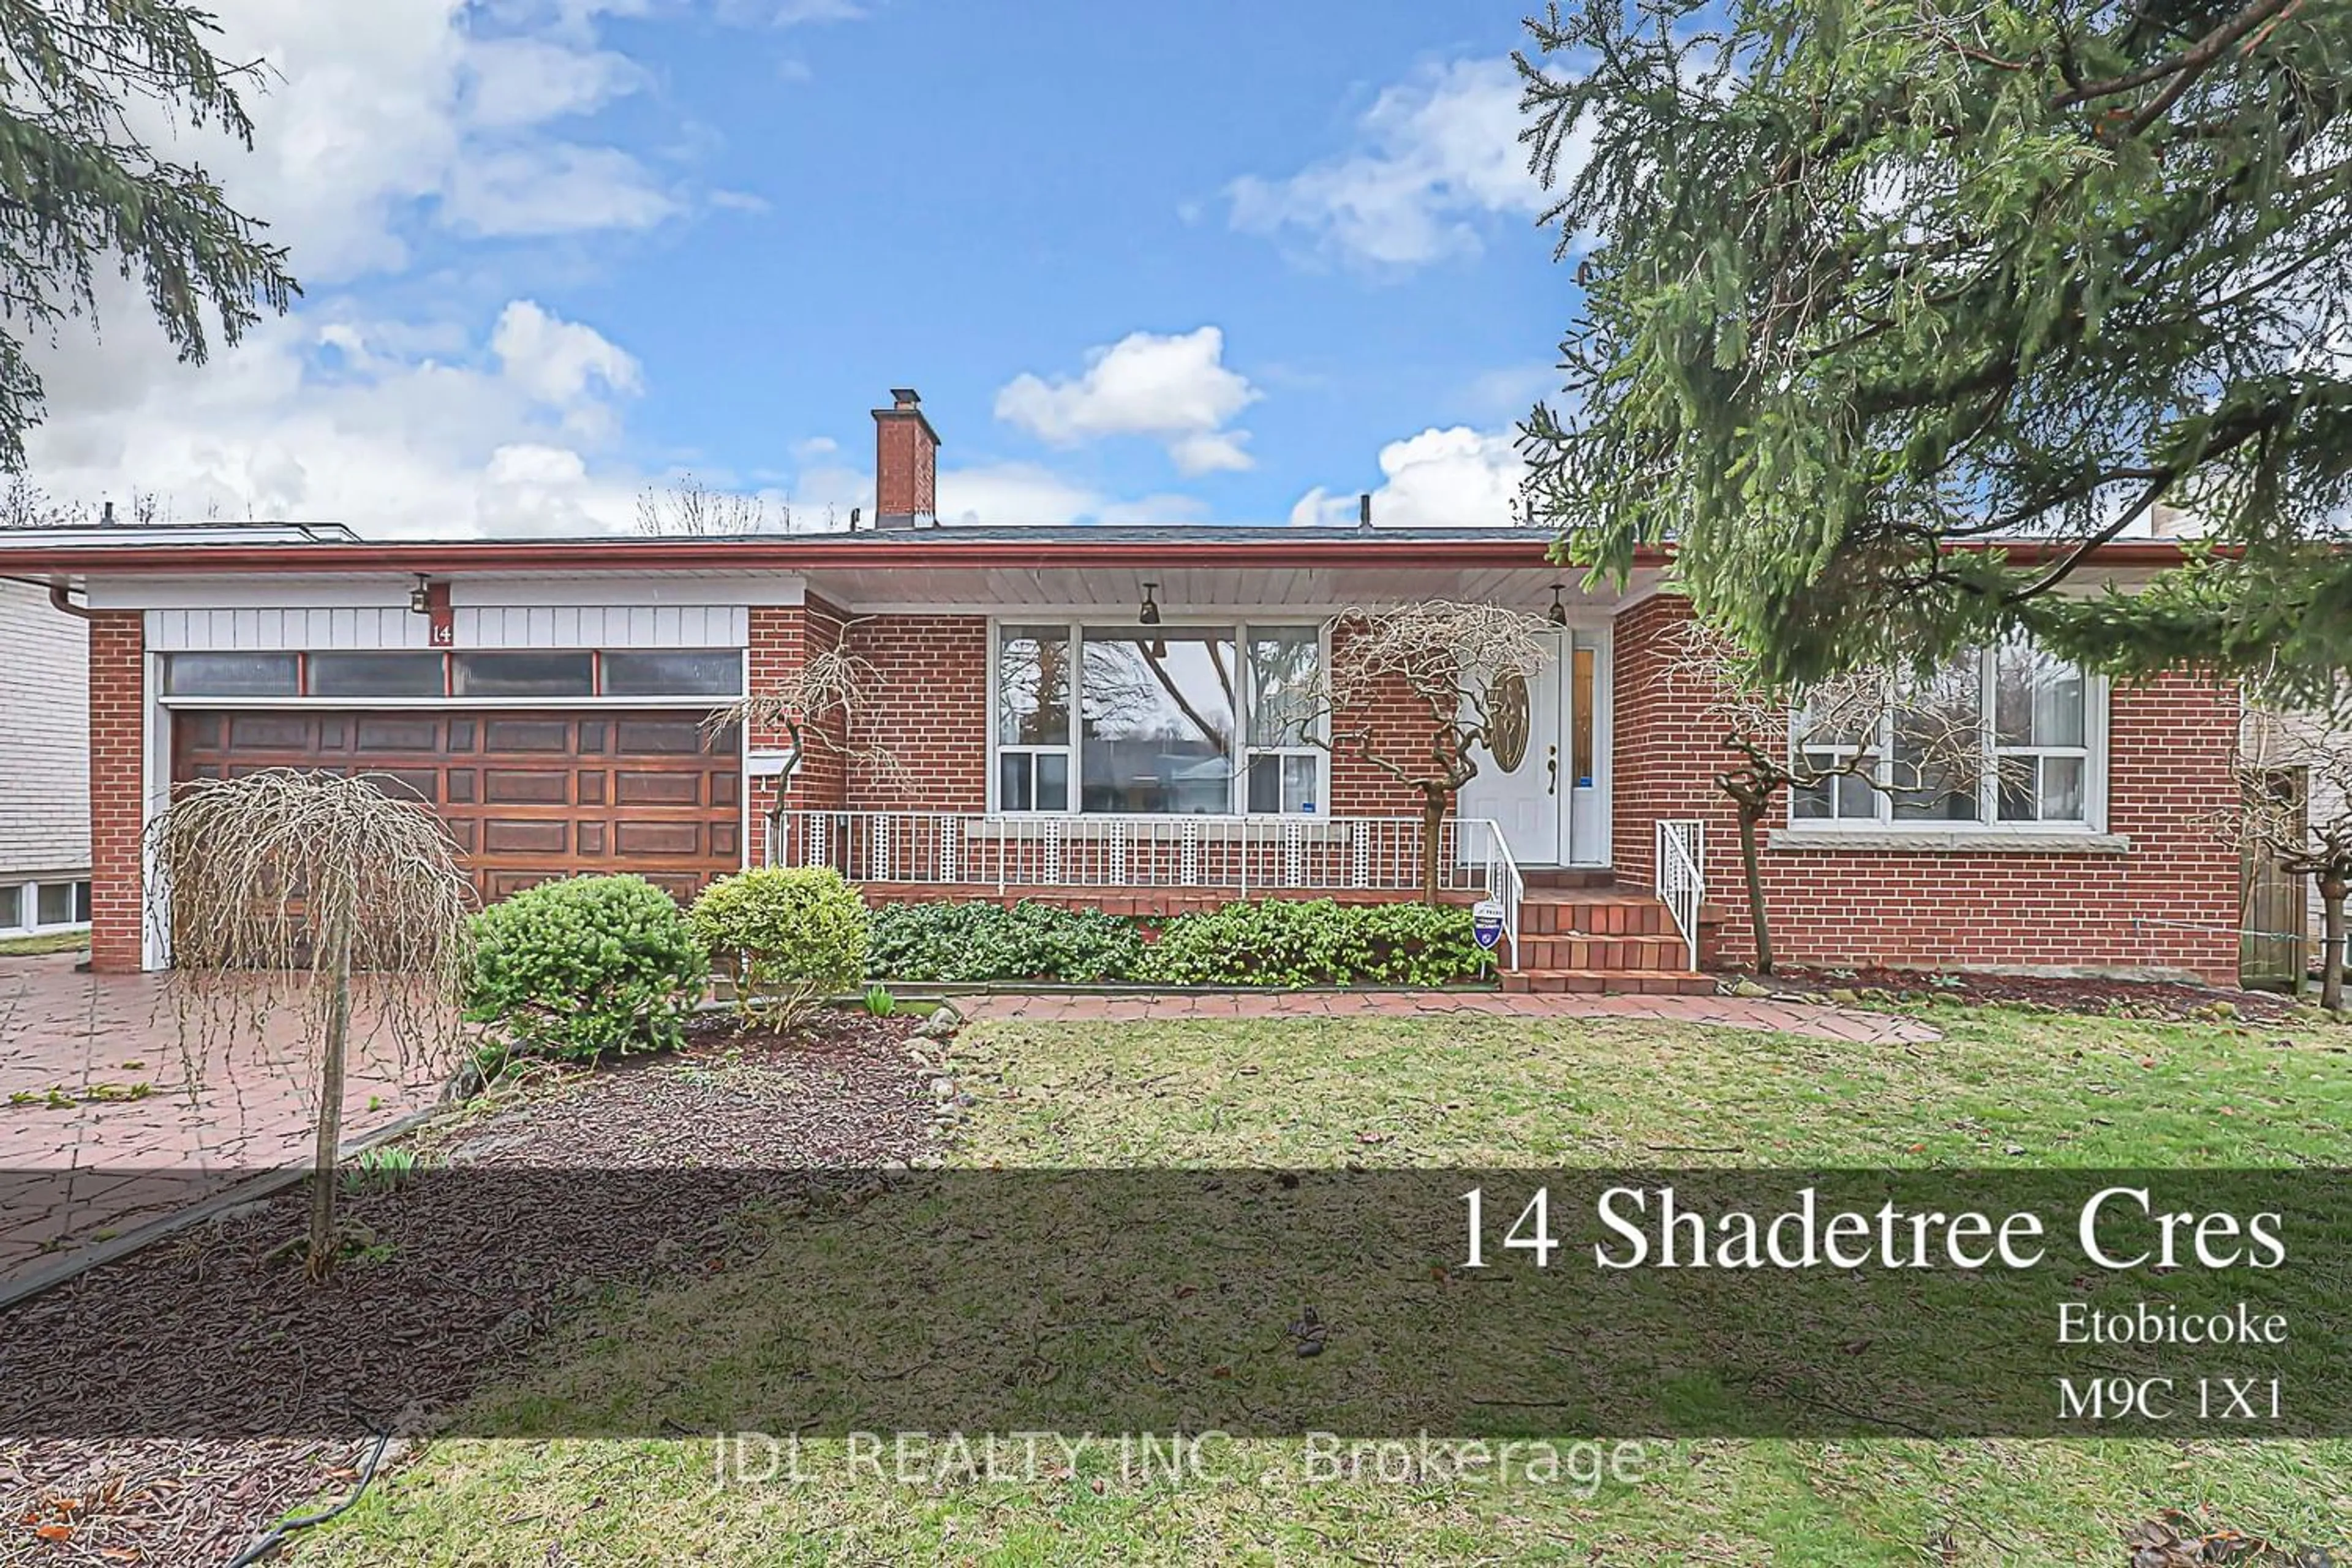 Frontside or backside of a home for 14 Shadetree Cres, Toronto Ontario M9C 1X1